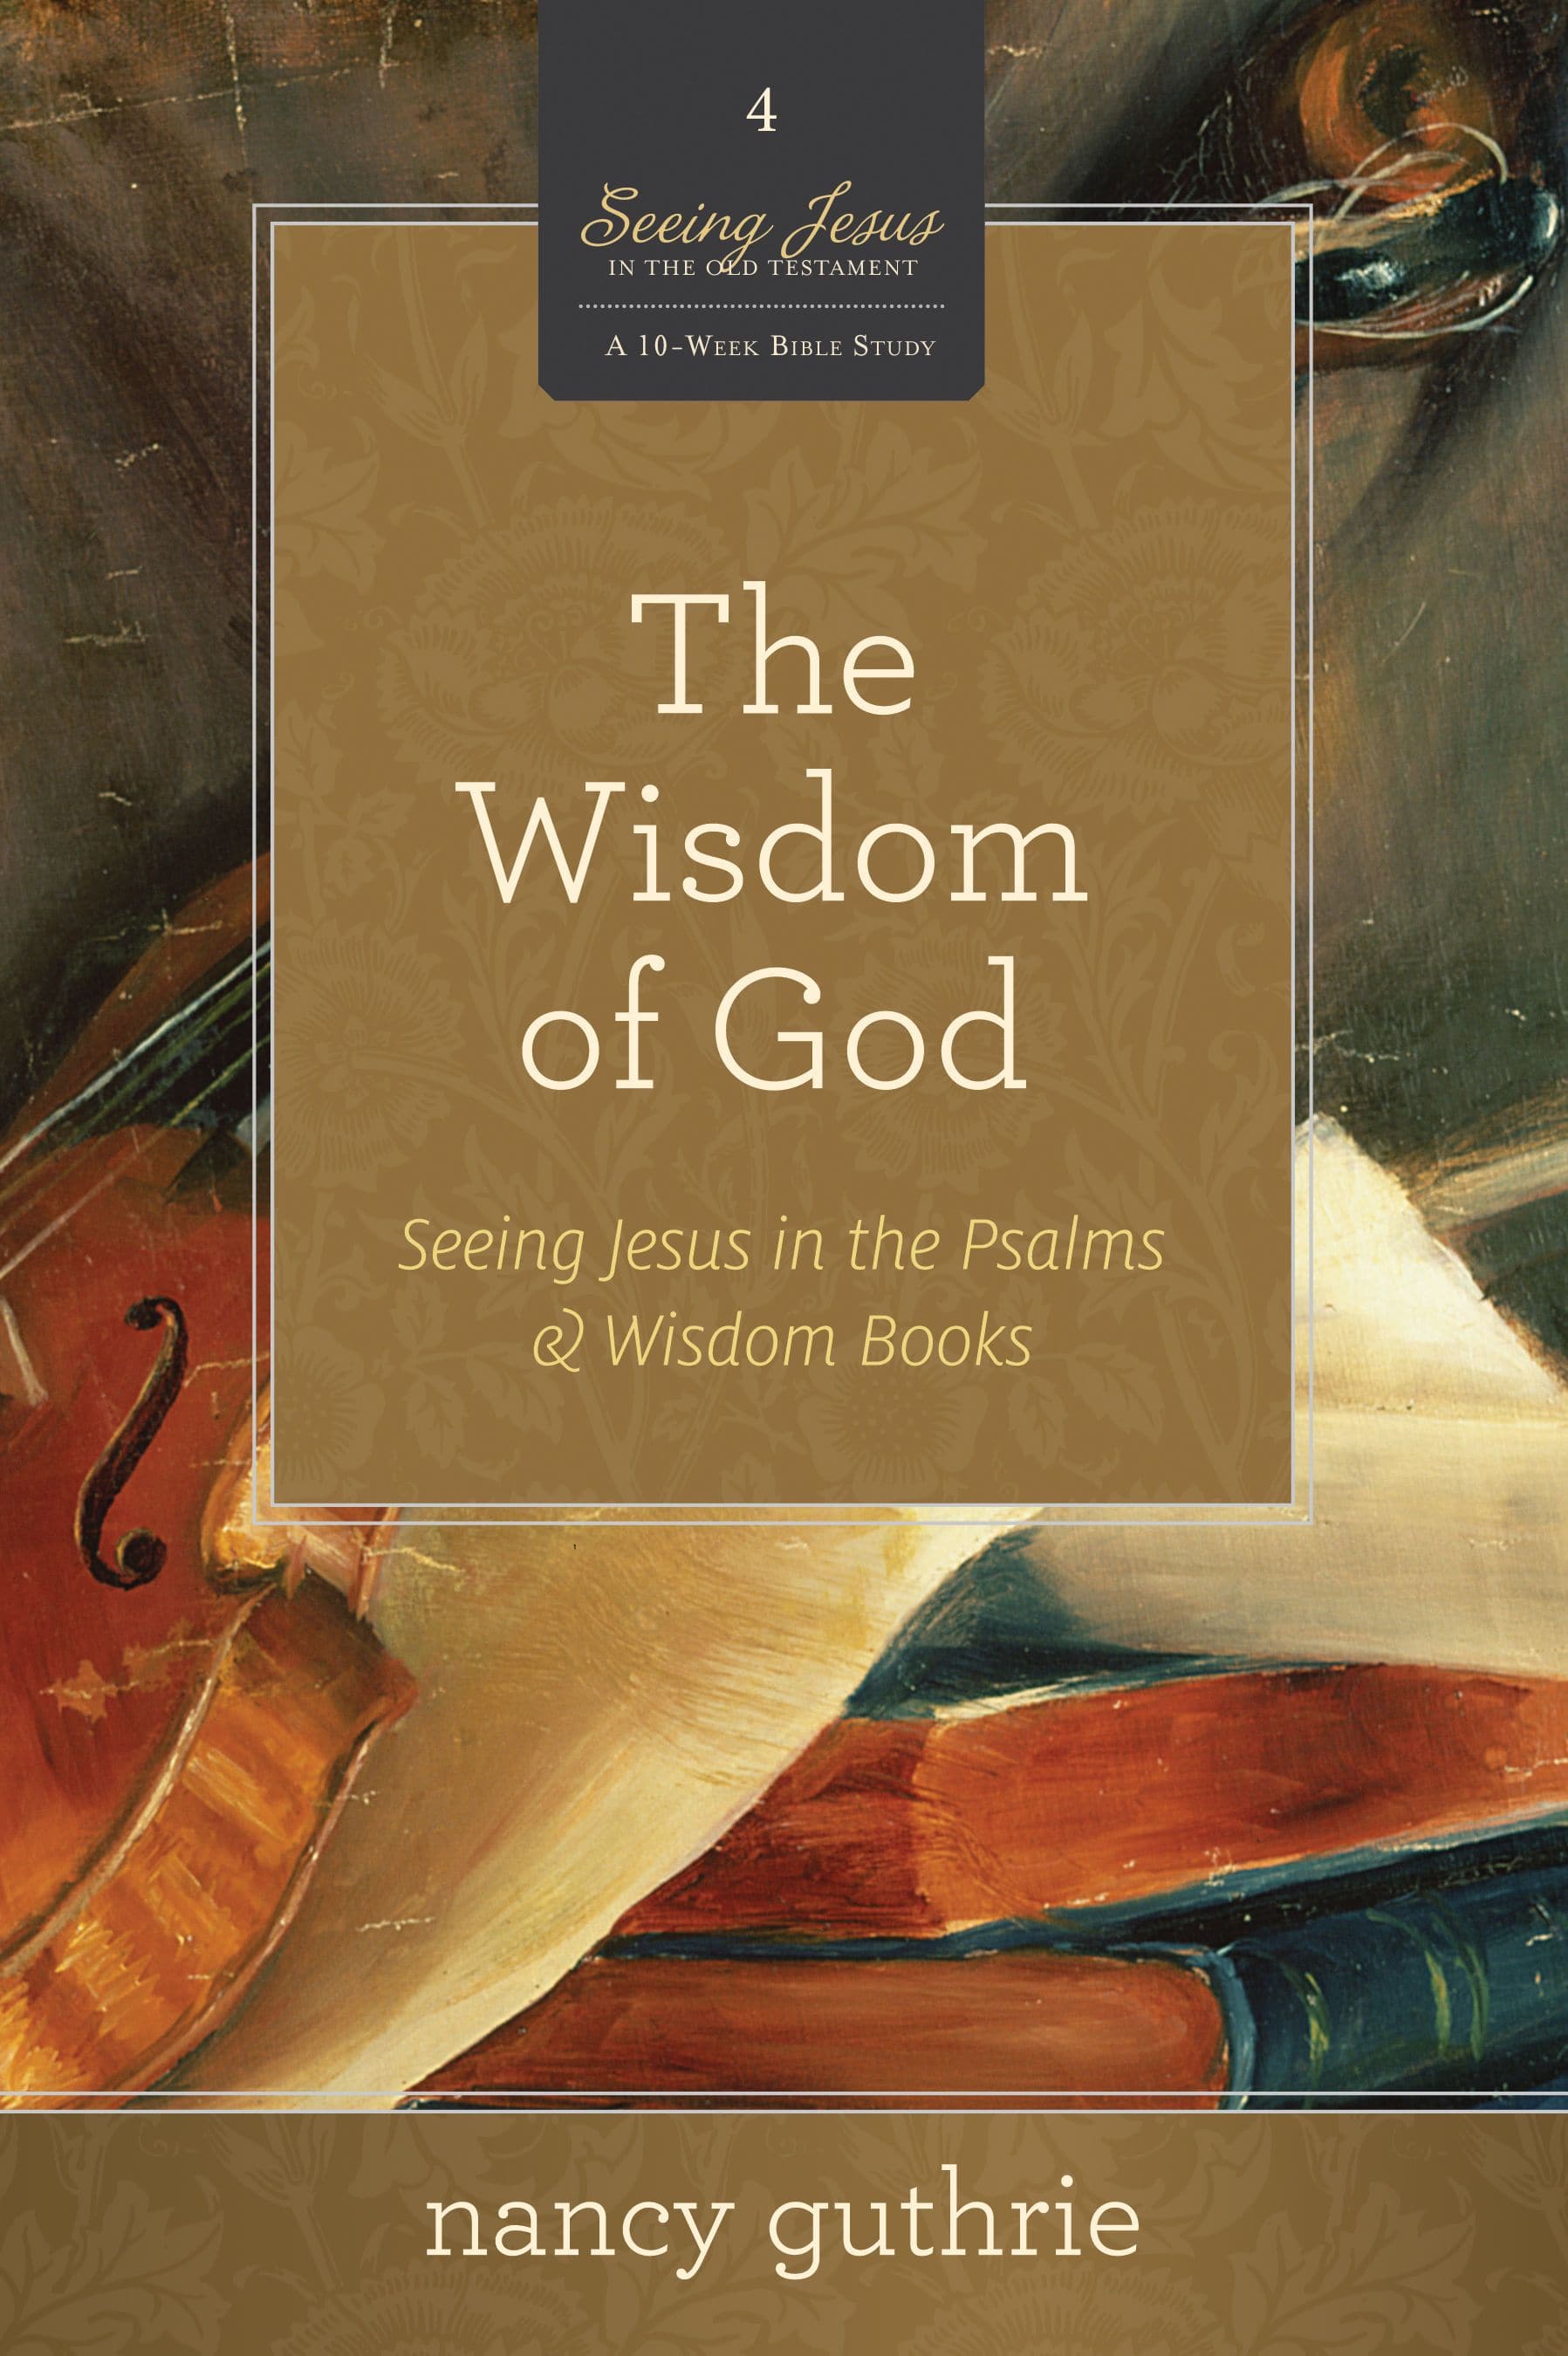 Psalms　of　Wisdom　The　Jesus　Seeing　in　Wisdom　and　God:　the